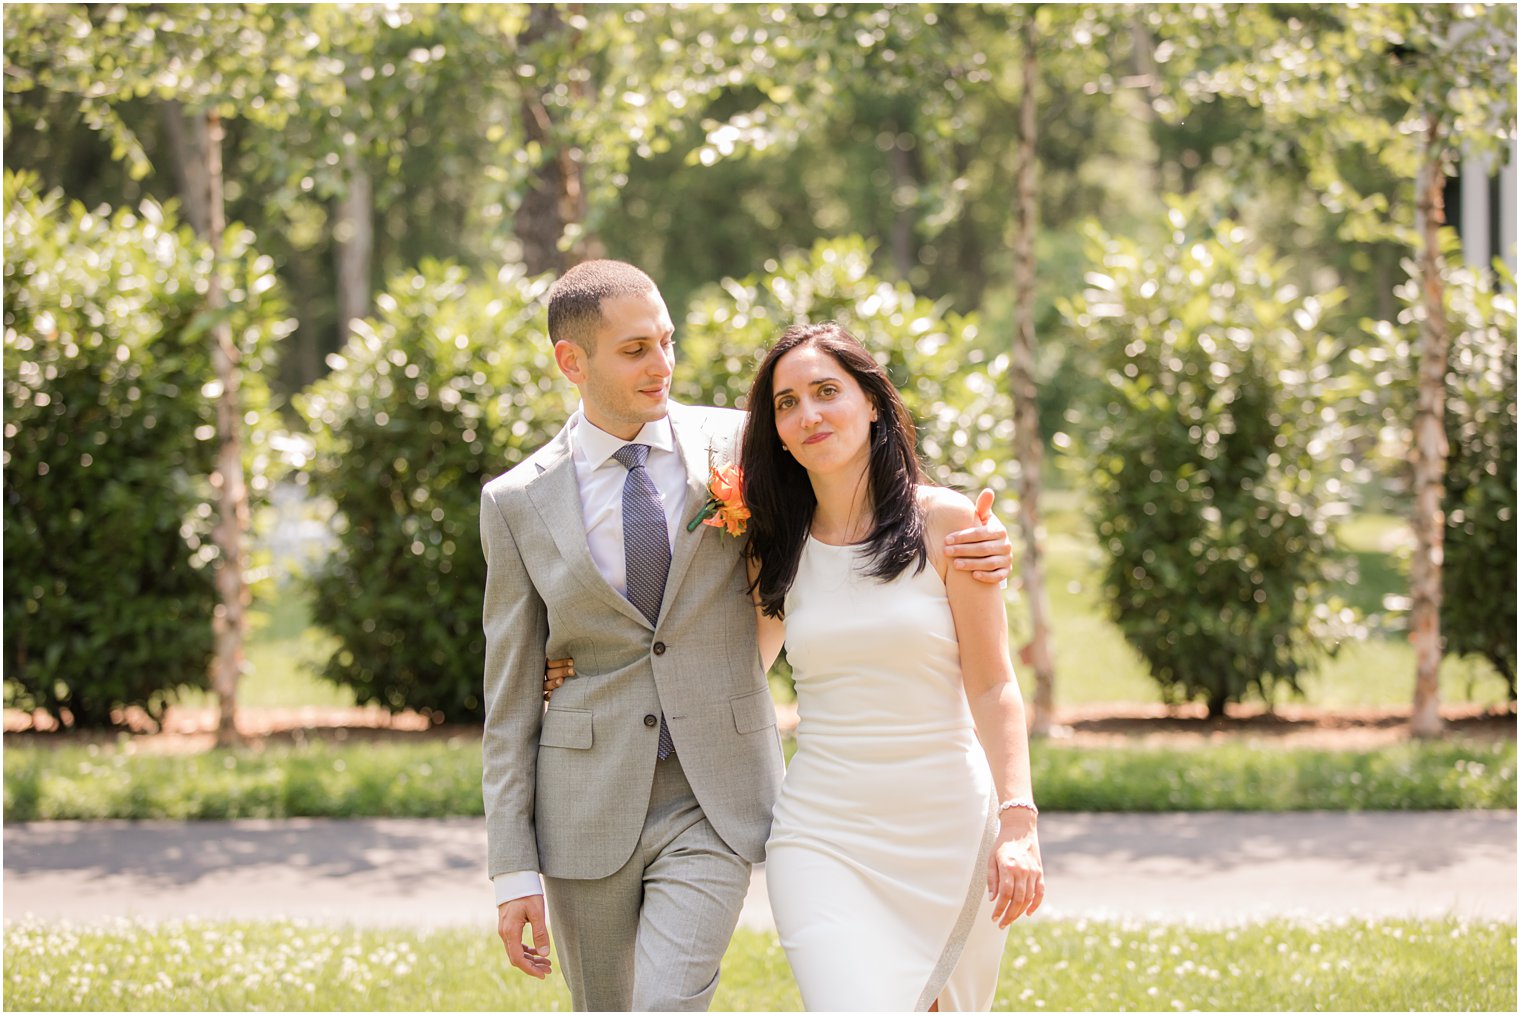 Candid bride and groom wedding photos in woods of New Hope PA wedding